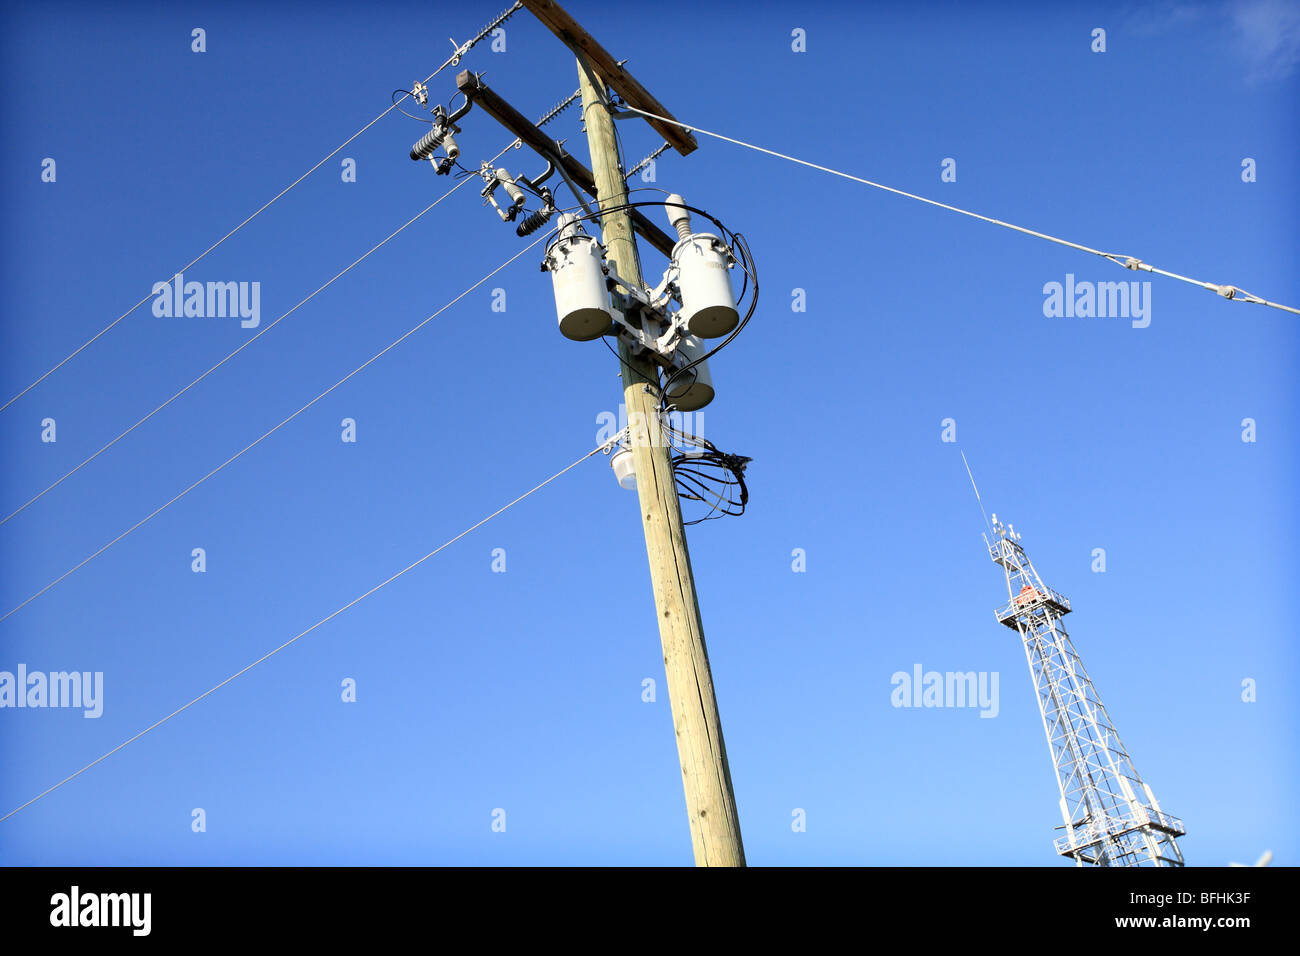 Power lines and oil drilling derrick. Stock Photo